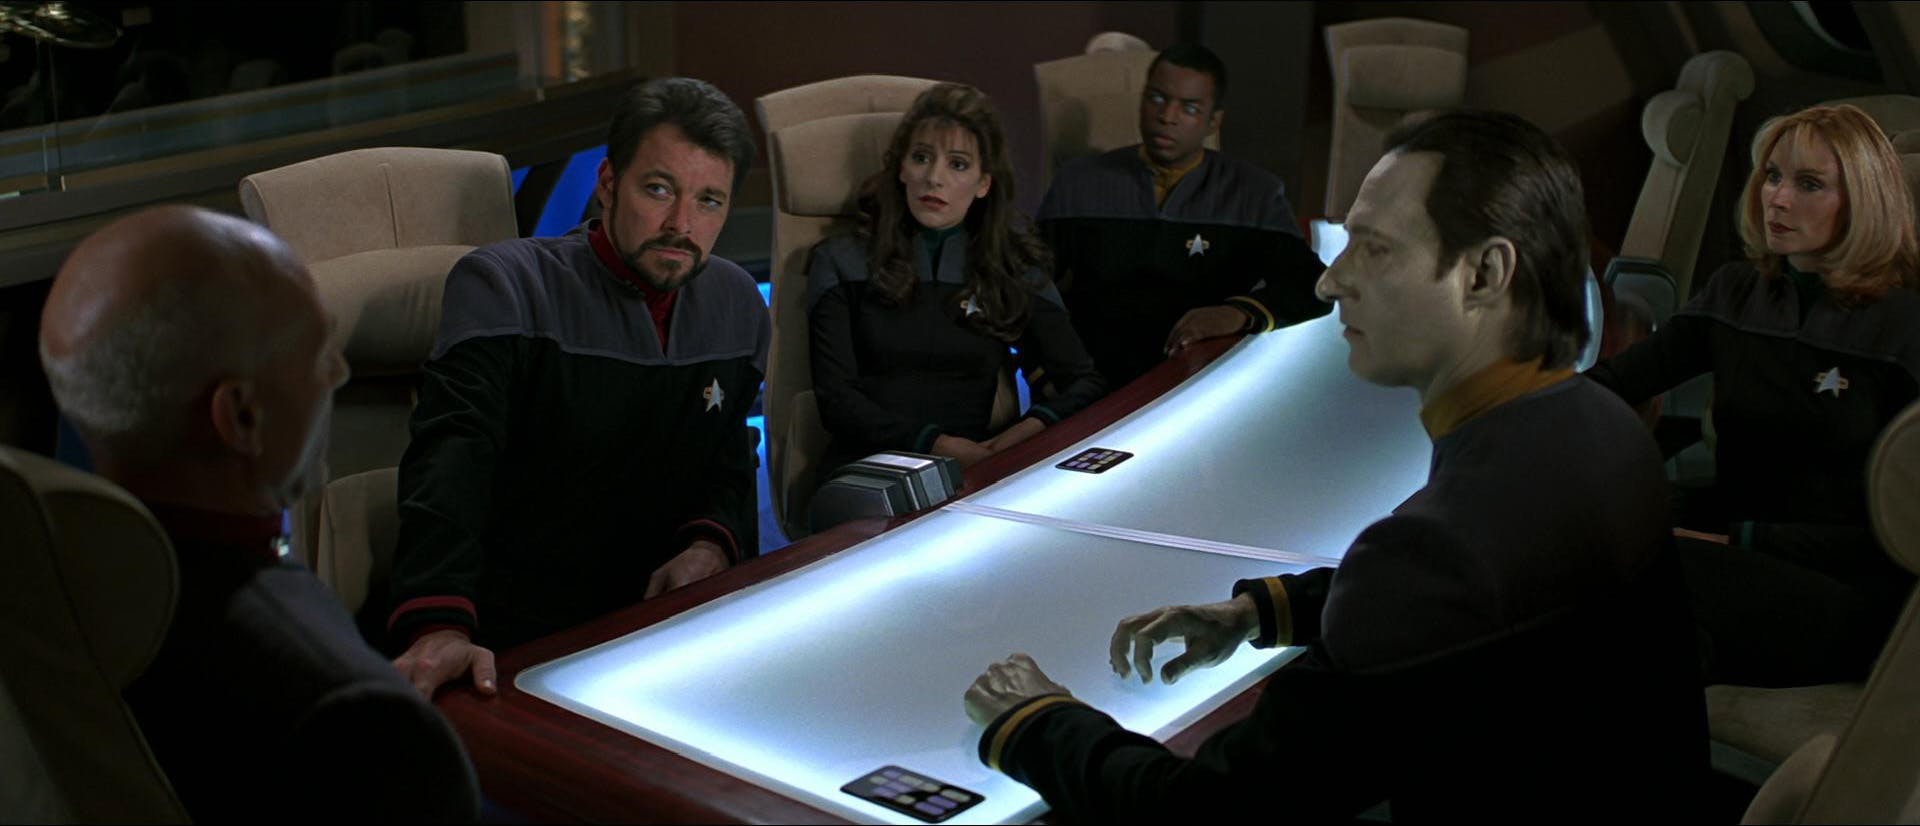 The Enterprise crew Riker, Deanna Troi, La Forge, Data, and Beverly Crusher gather at the Enterprise Observation Lounge with Jean-Luc Picard at the head of the table in Star Trek: First Contact